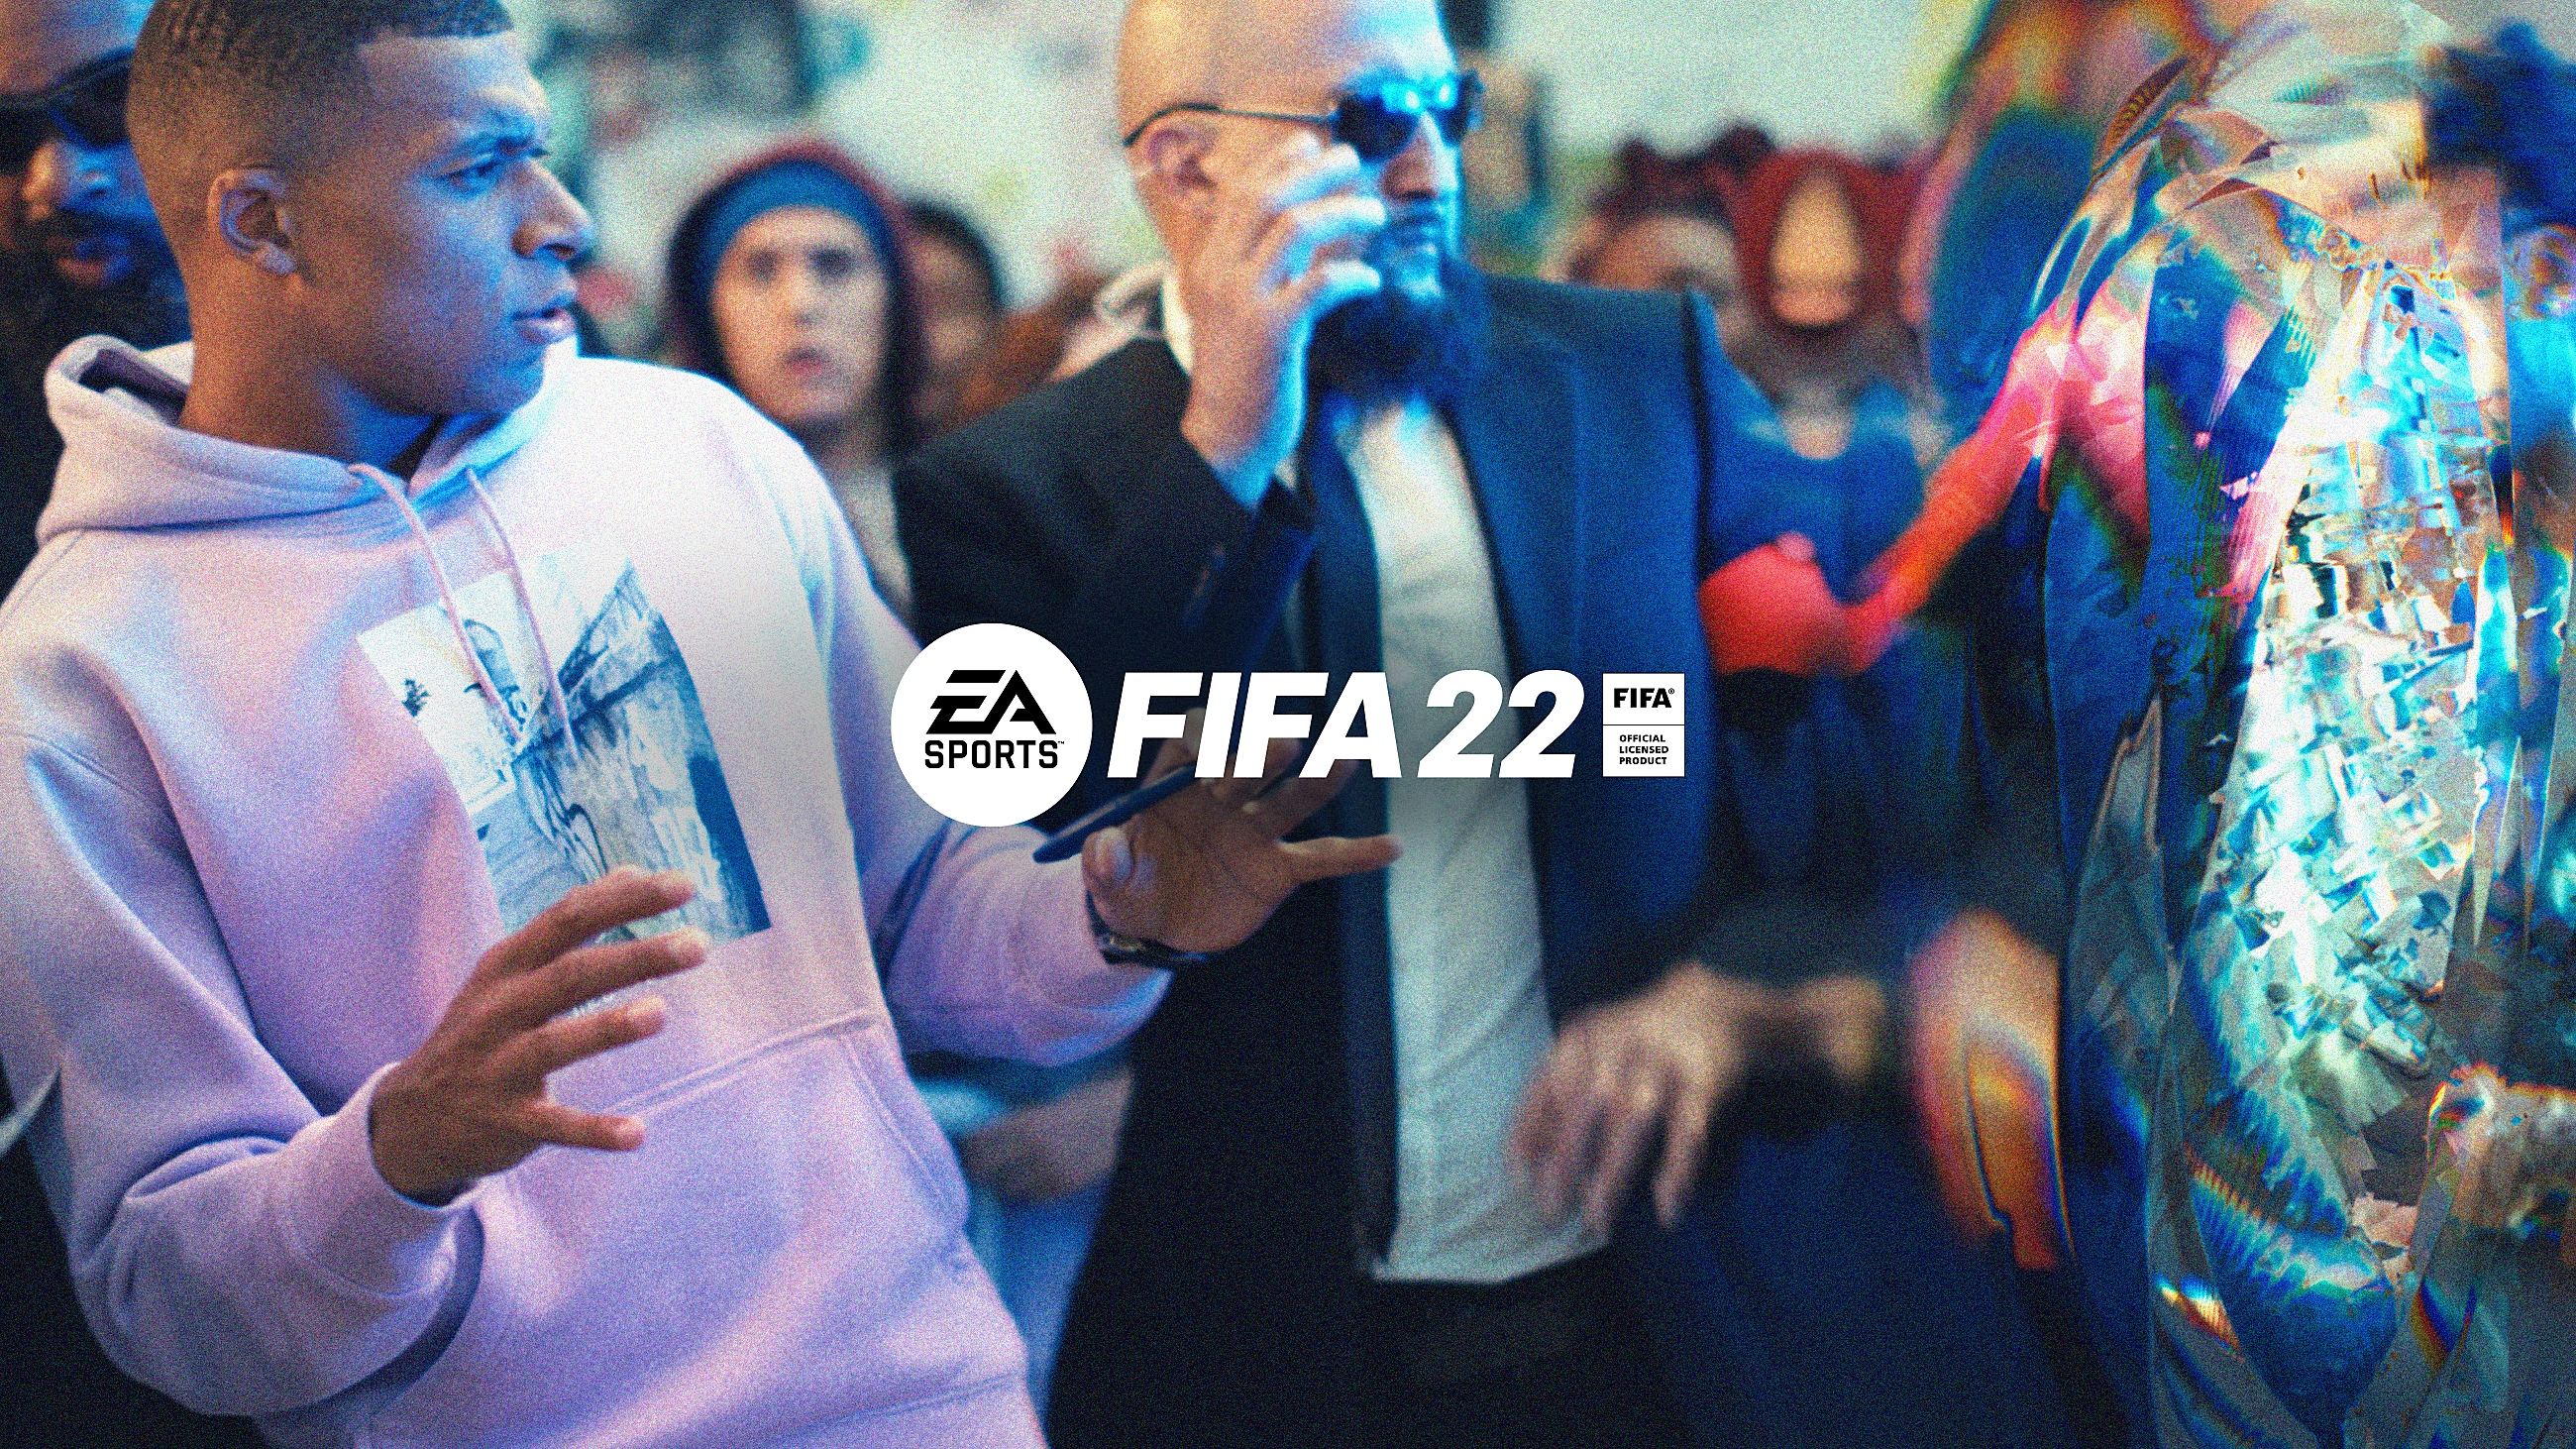 PS5 | PS4《FIFA 22》Powered by Football | 官方發行預告片